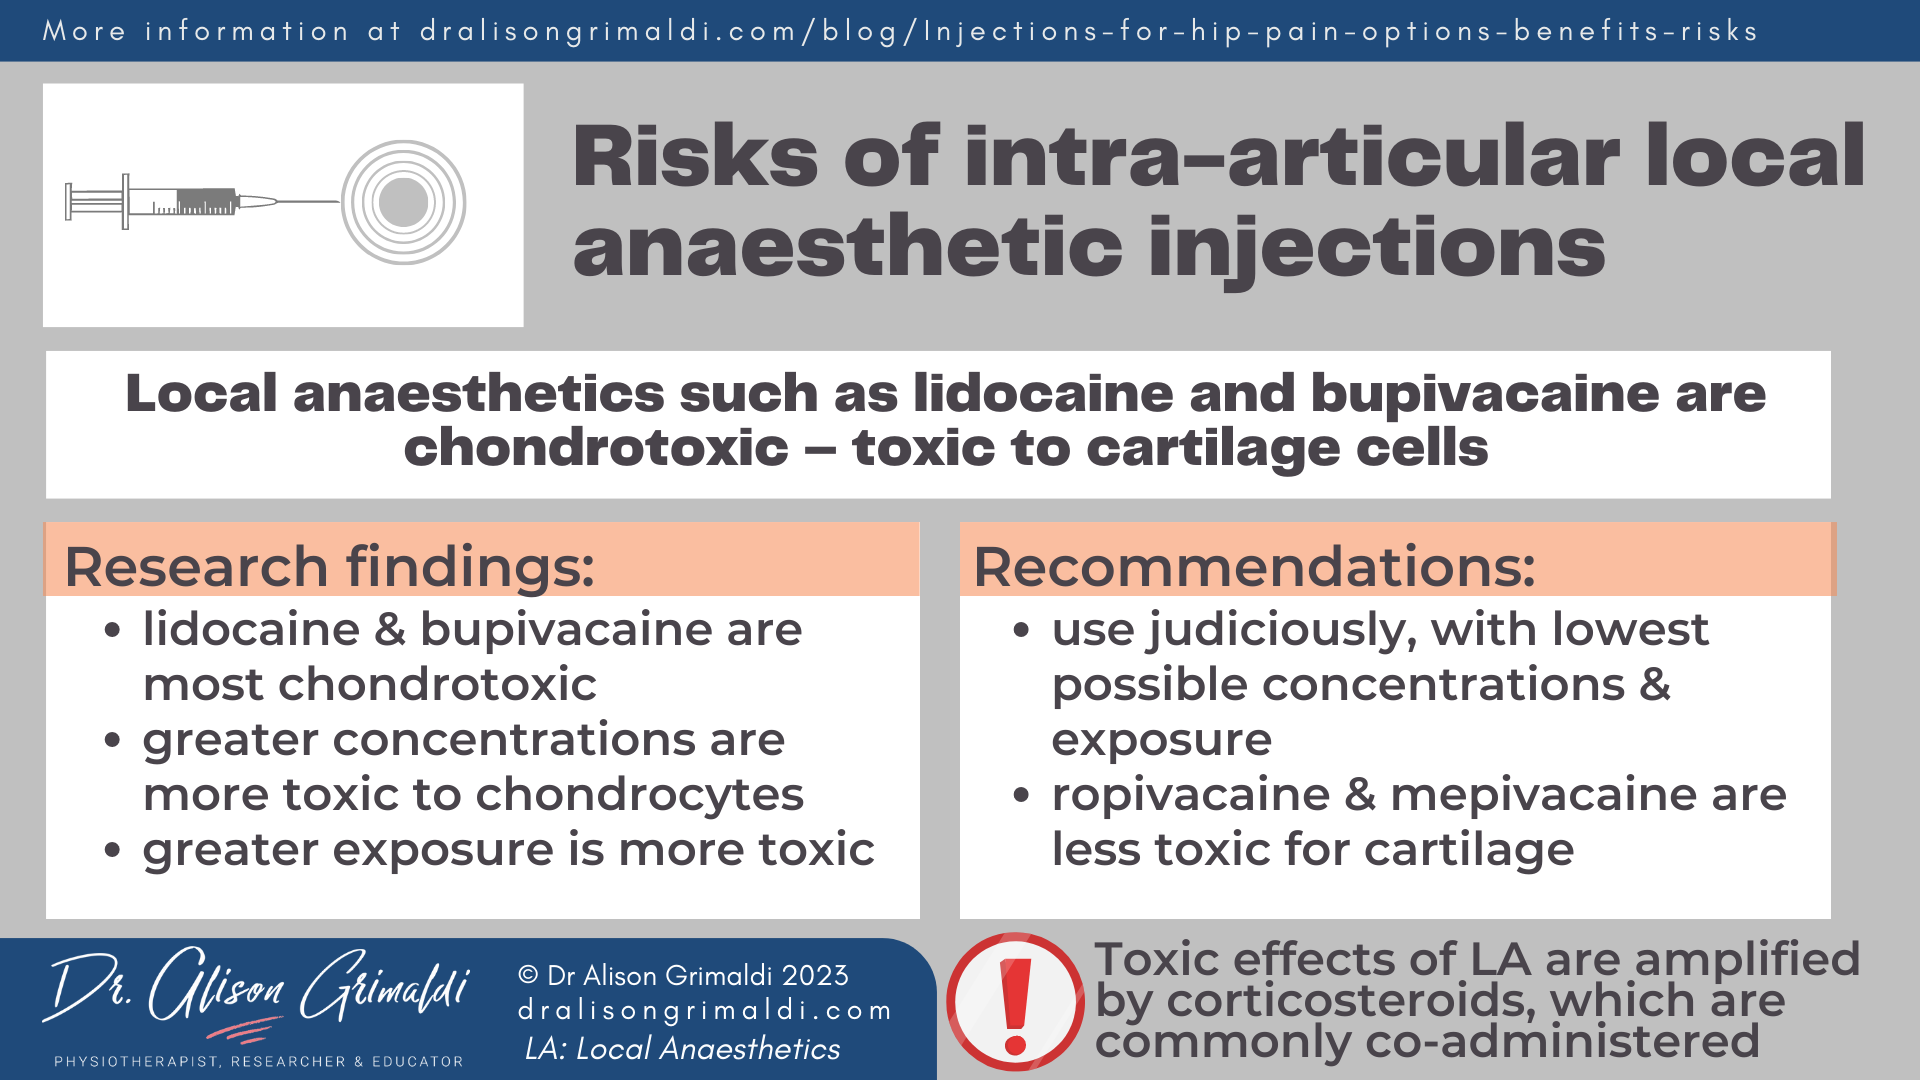 Risks of intra-articular local anaesthetic injections